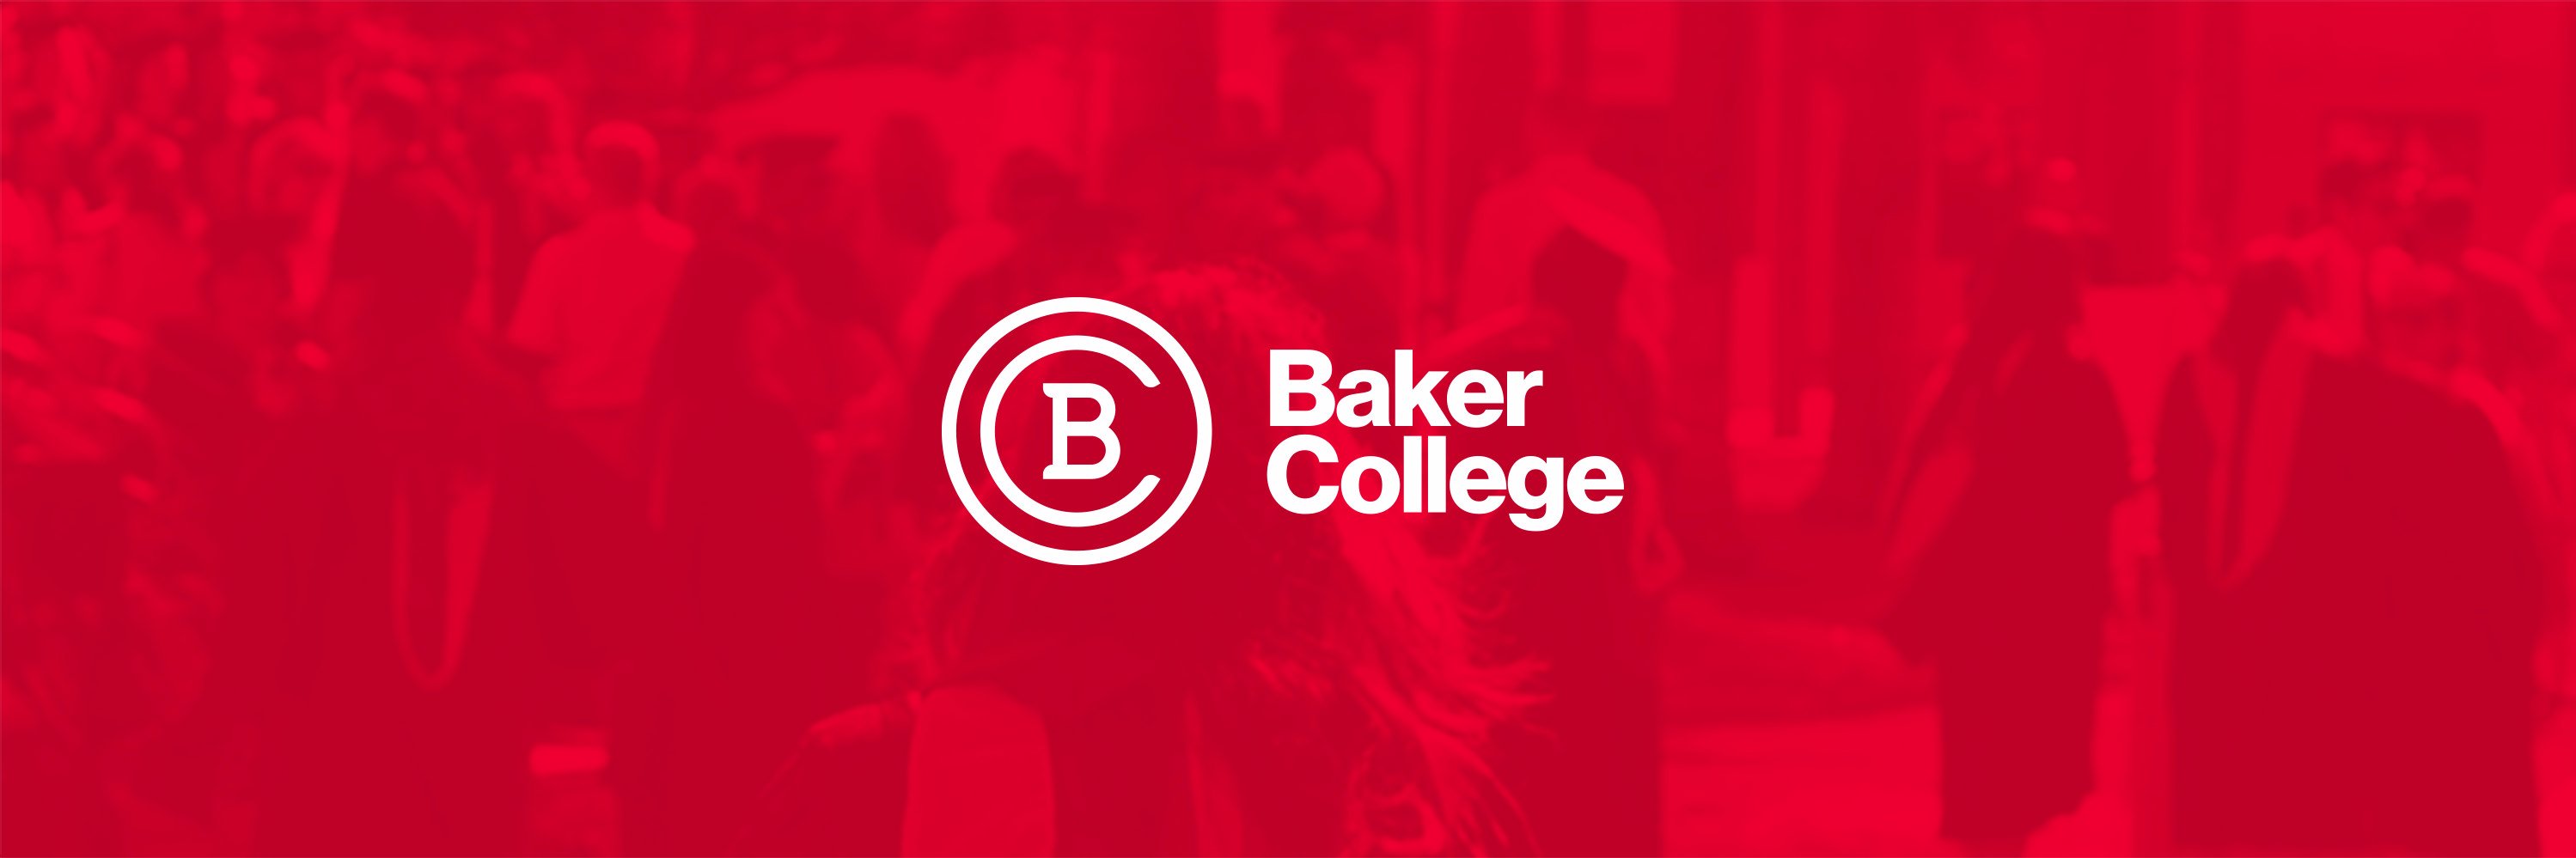 Baker College's official Twitter account